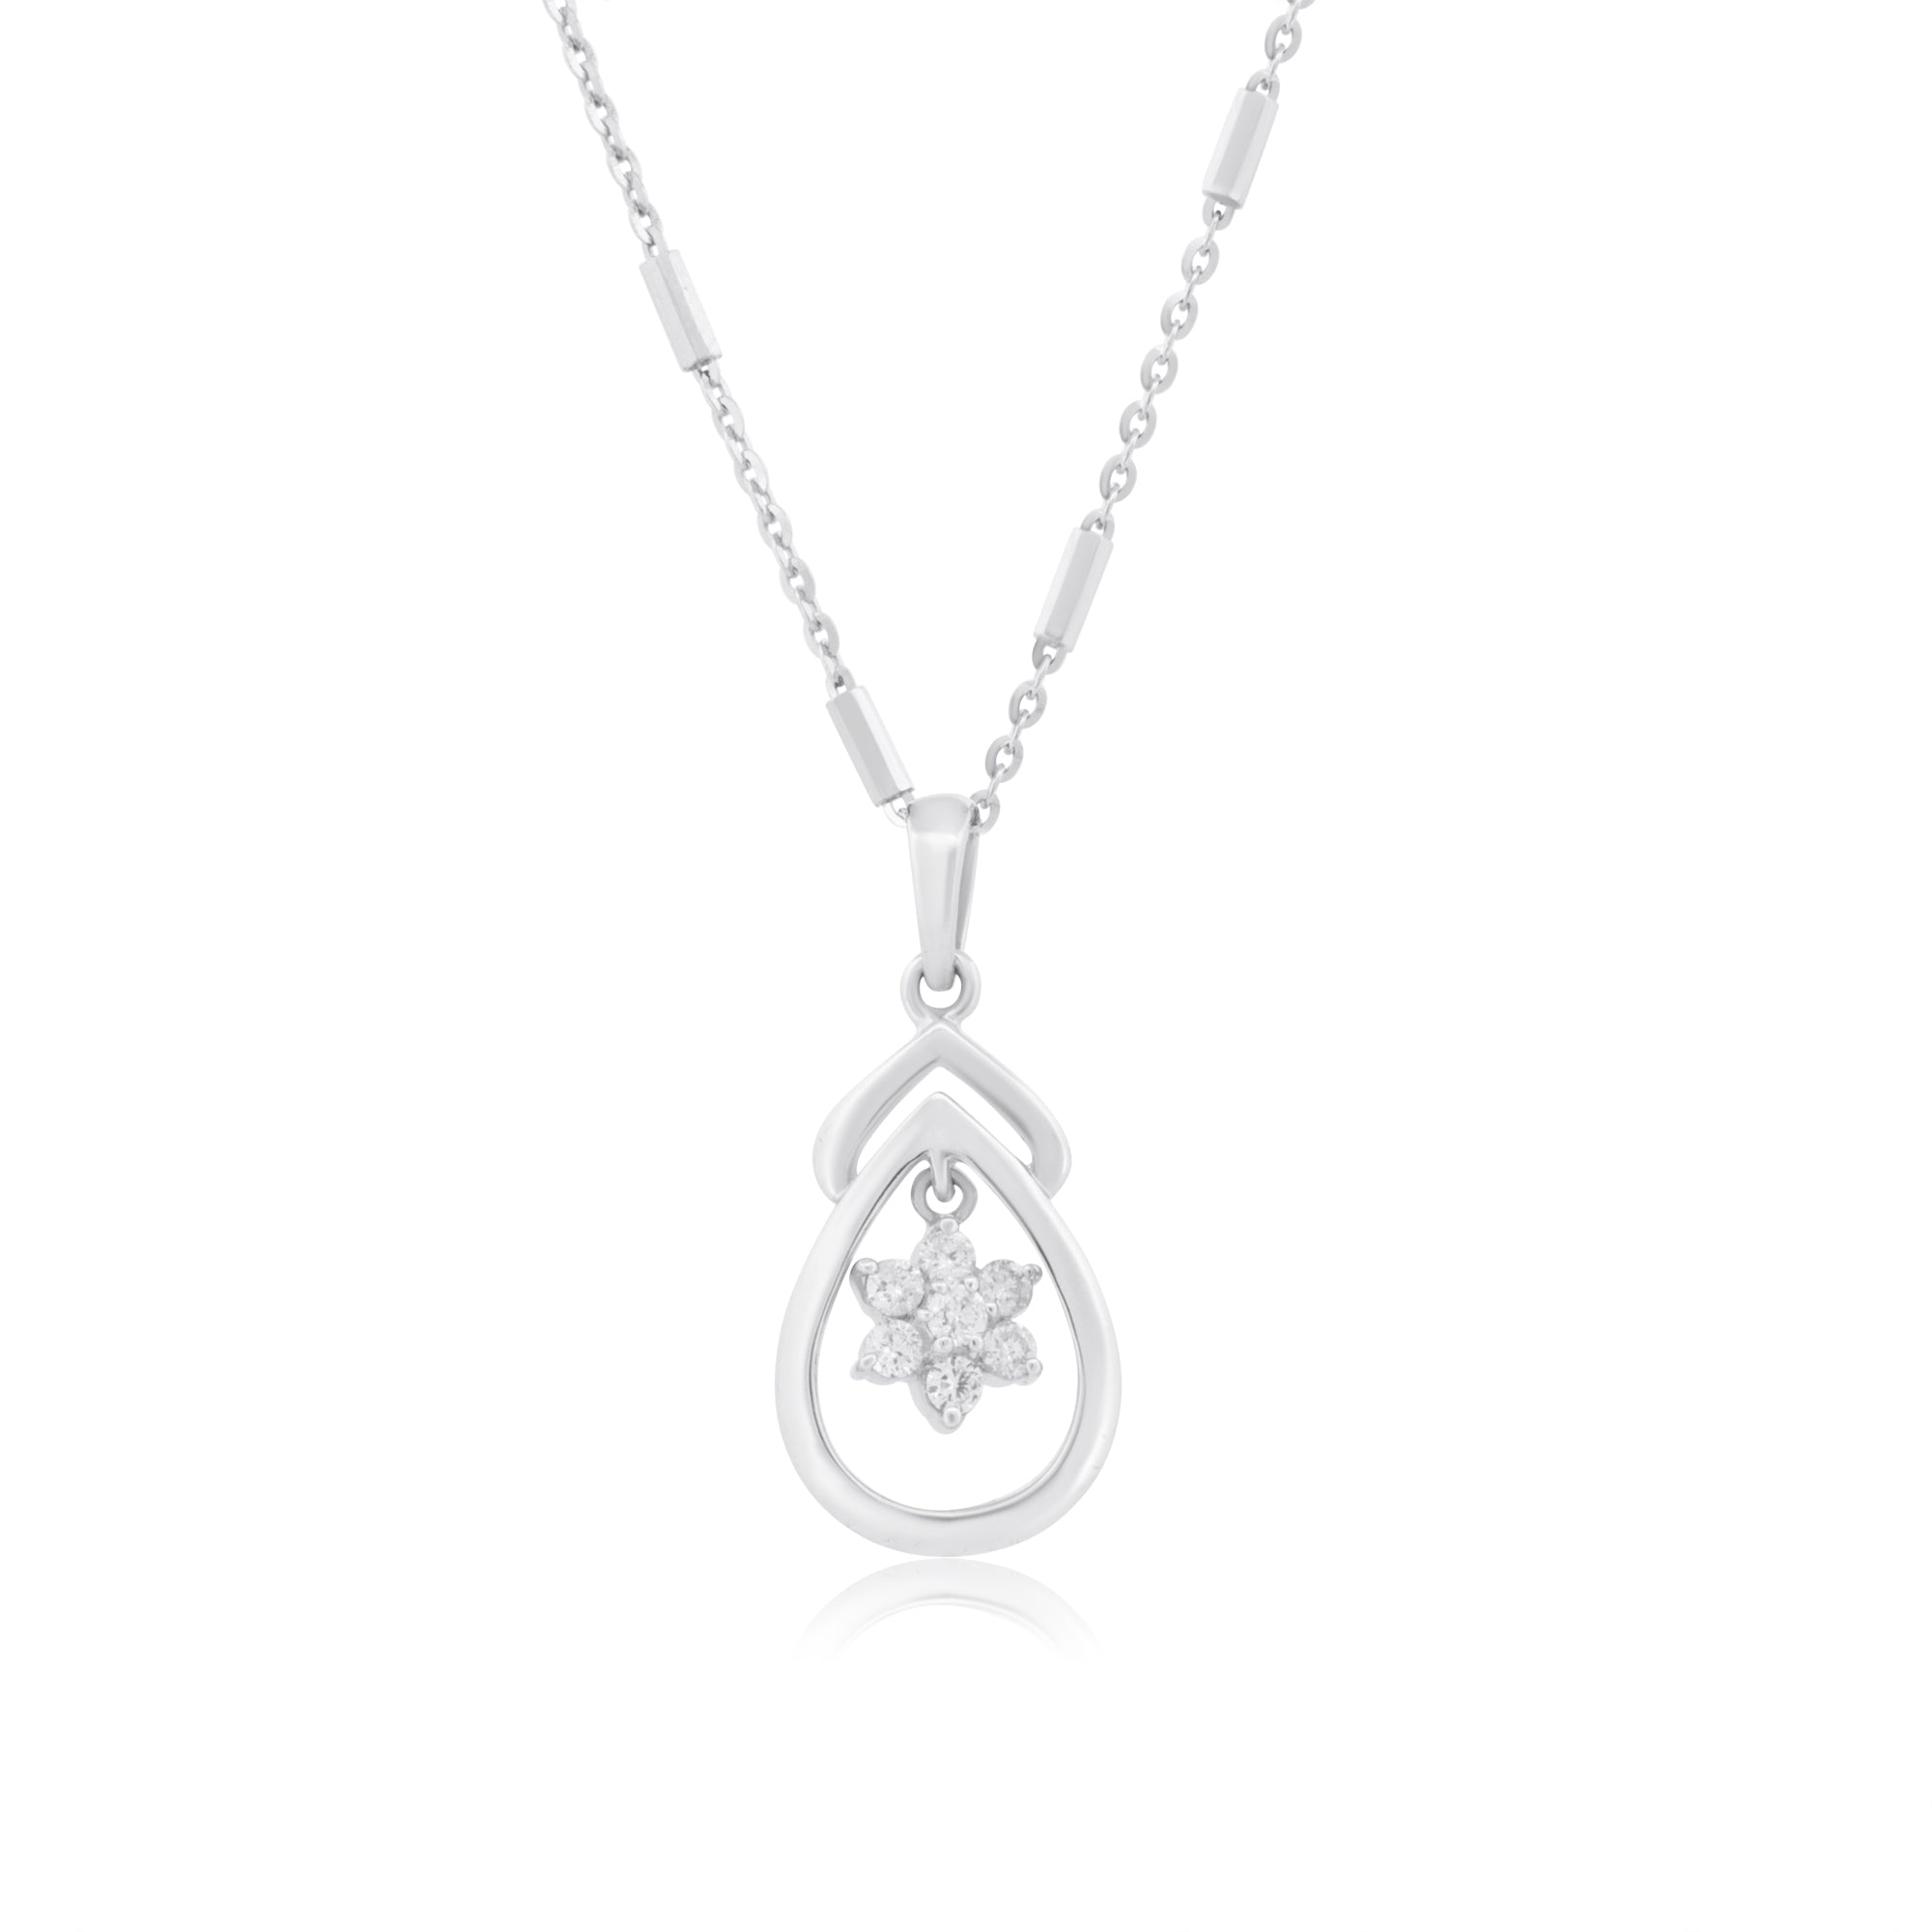 14k White Gold with .16Ctw White Diamond Dangling Flower Minimalist Necklace